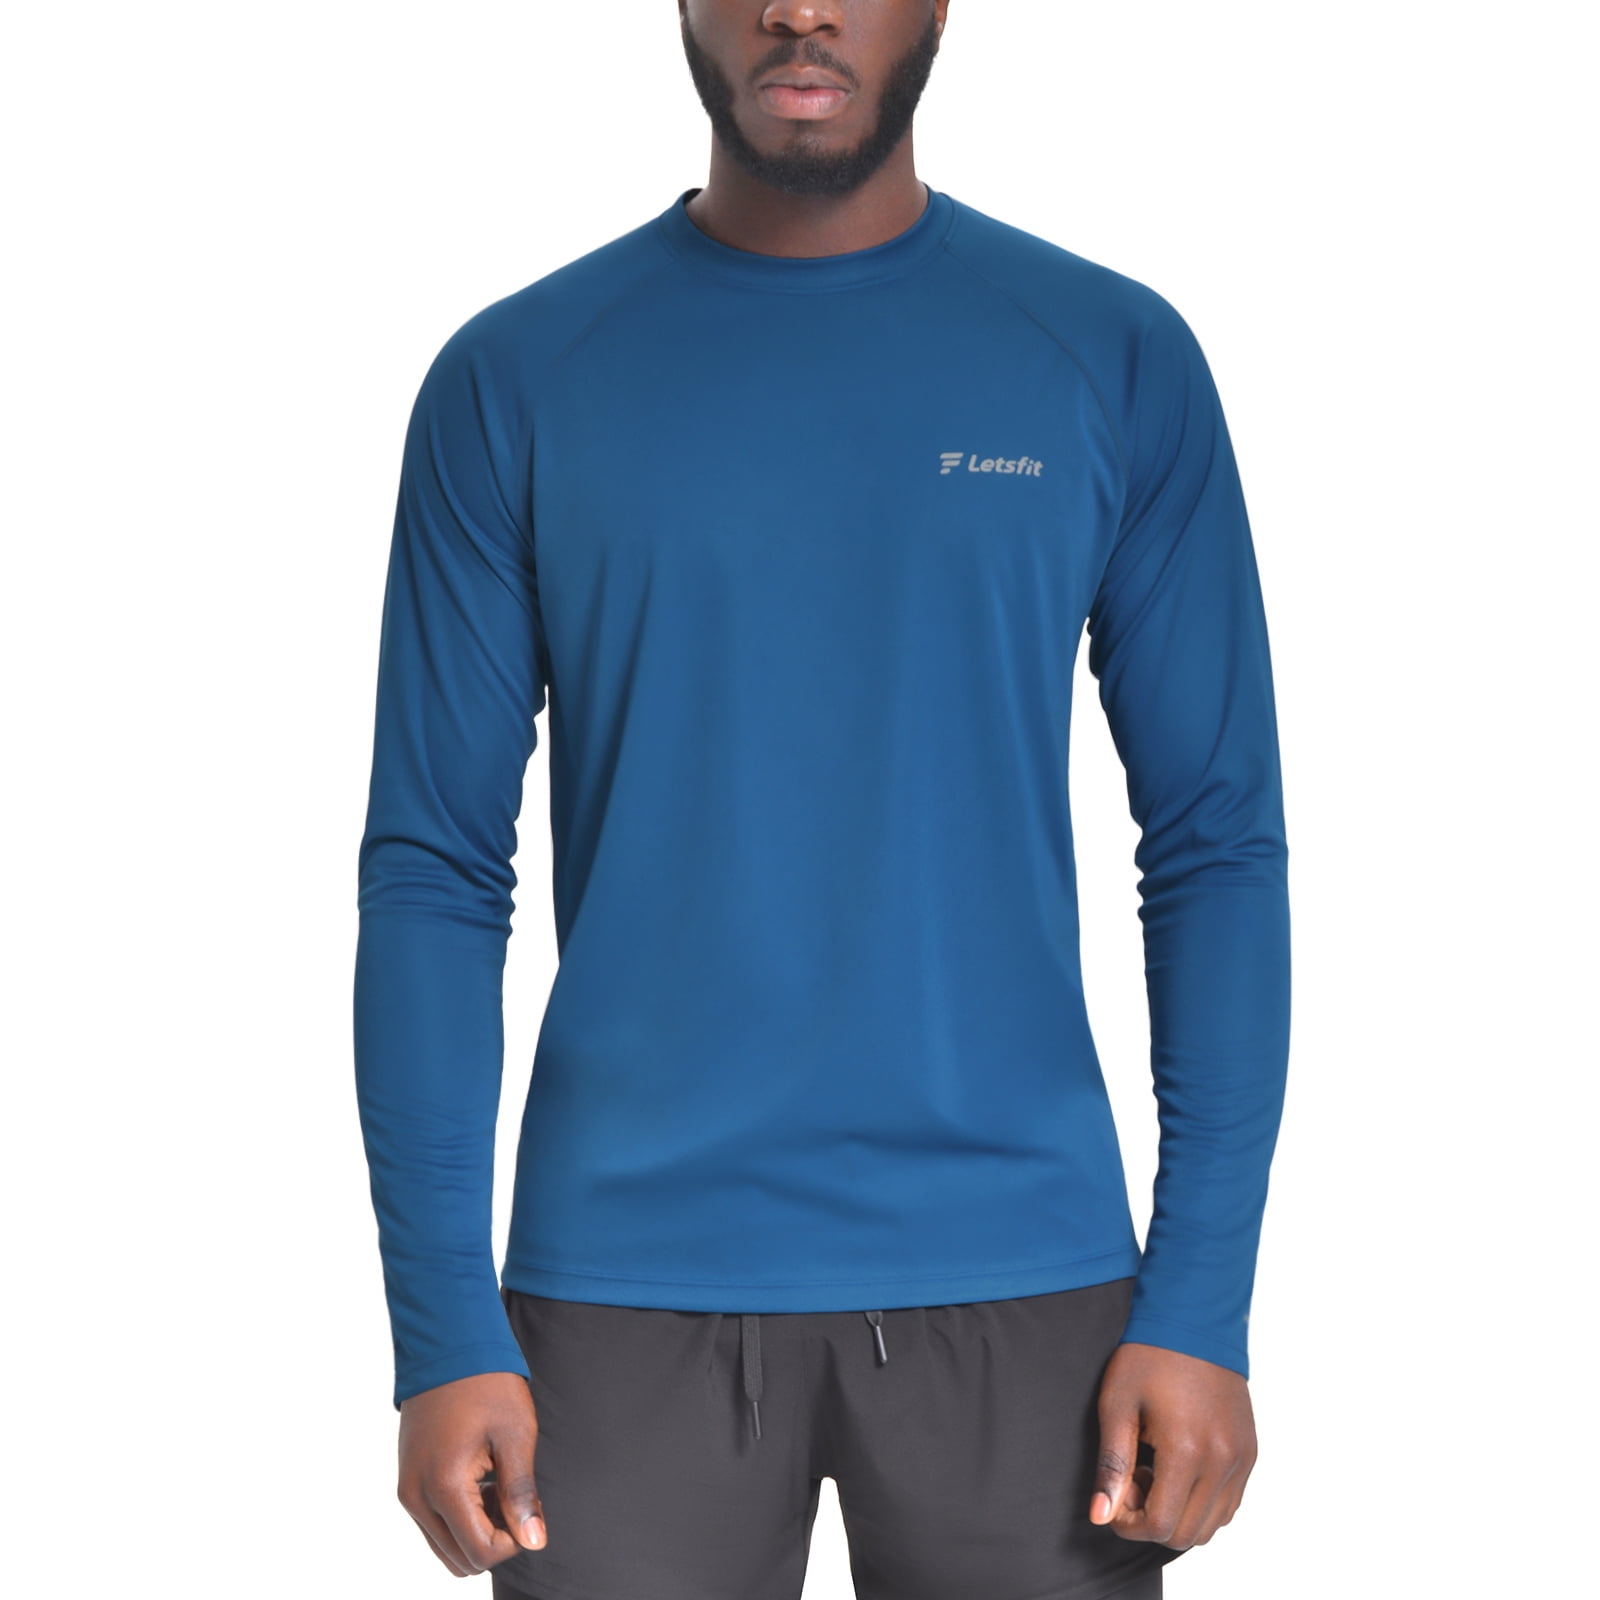 pas trug Hollywood Men's Shirts, Letsfit ES12 UPF 50+ UV Sun Protection Long Sleeve T-Shirts  for Hiking Running Fishing and Outdoor Sports - Walmart.com